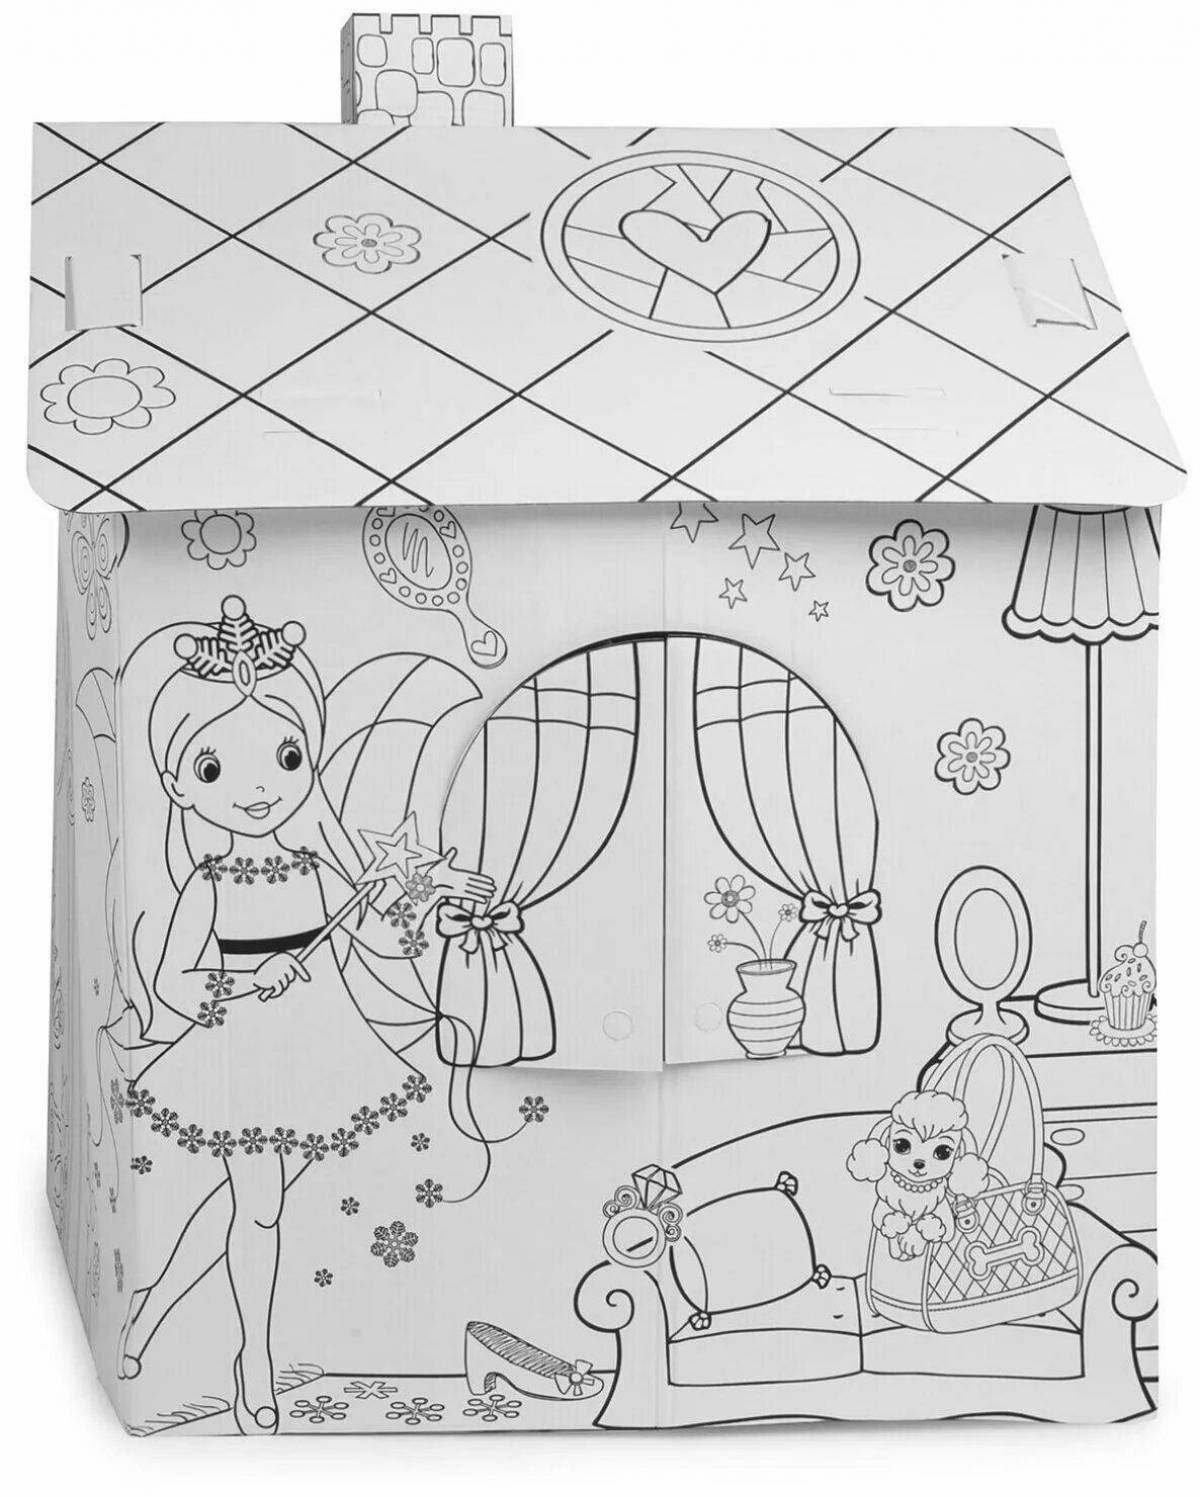 Exotic princess house coloring book for kids